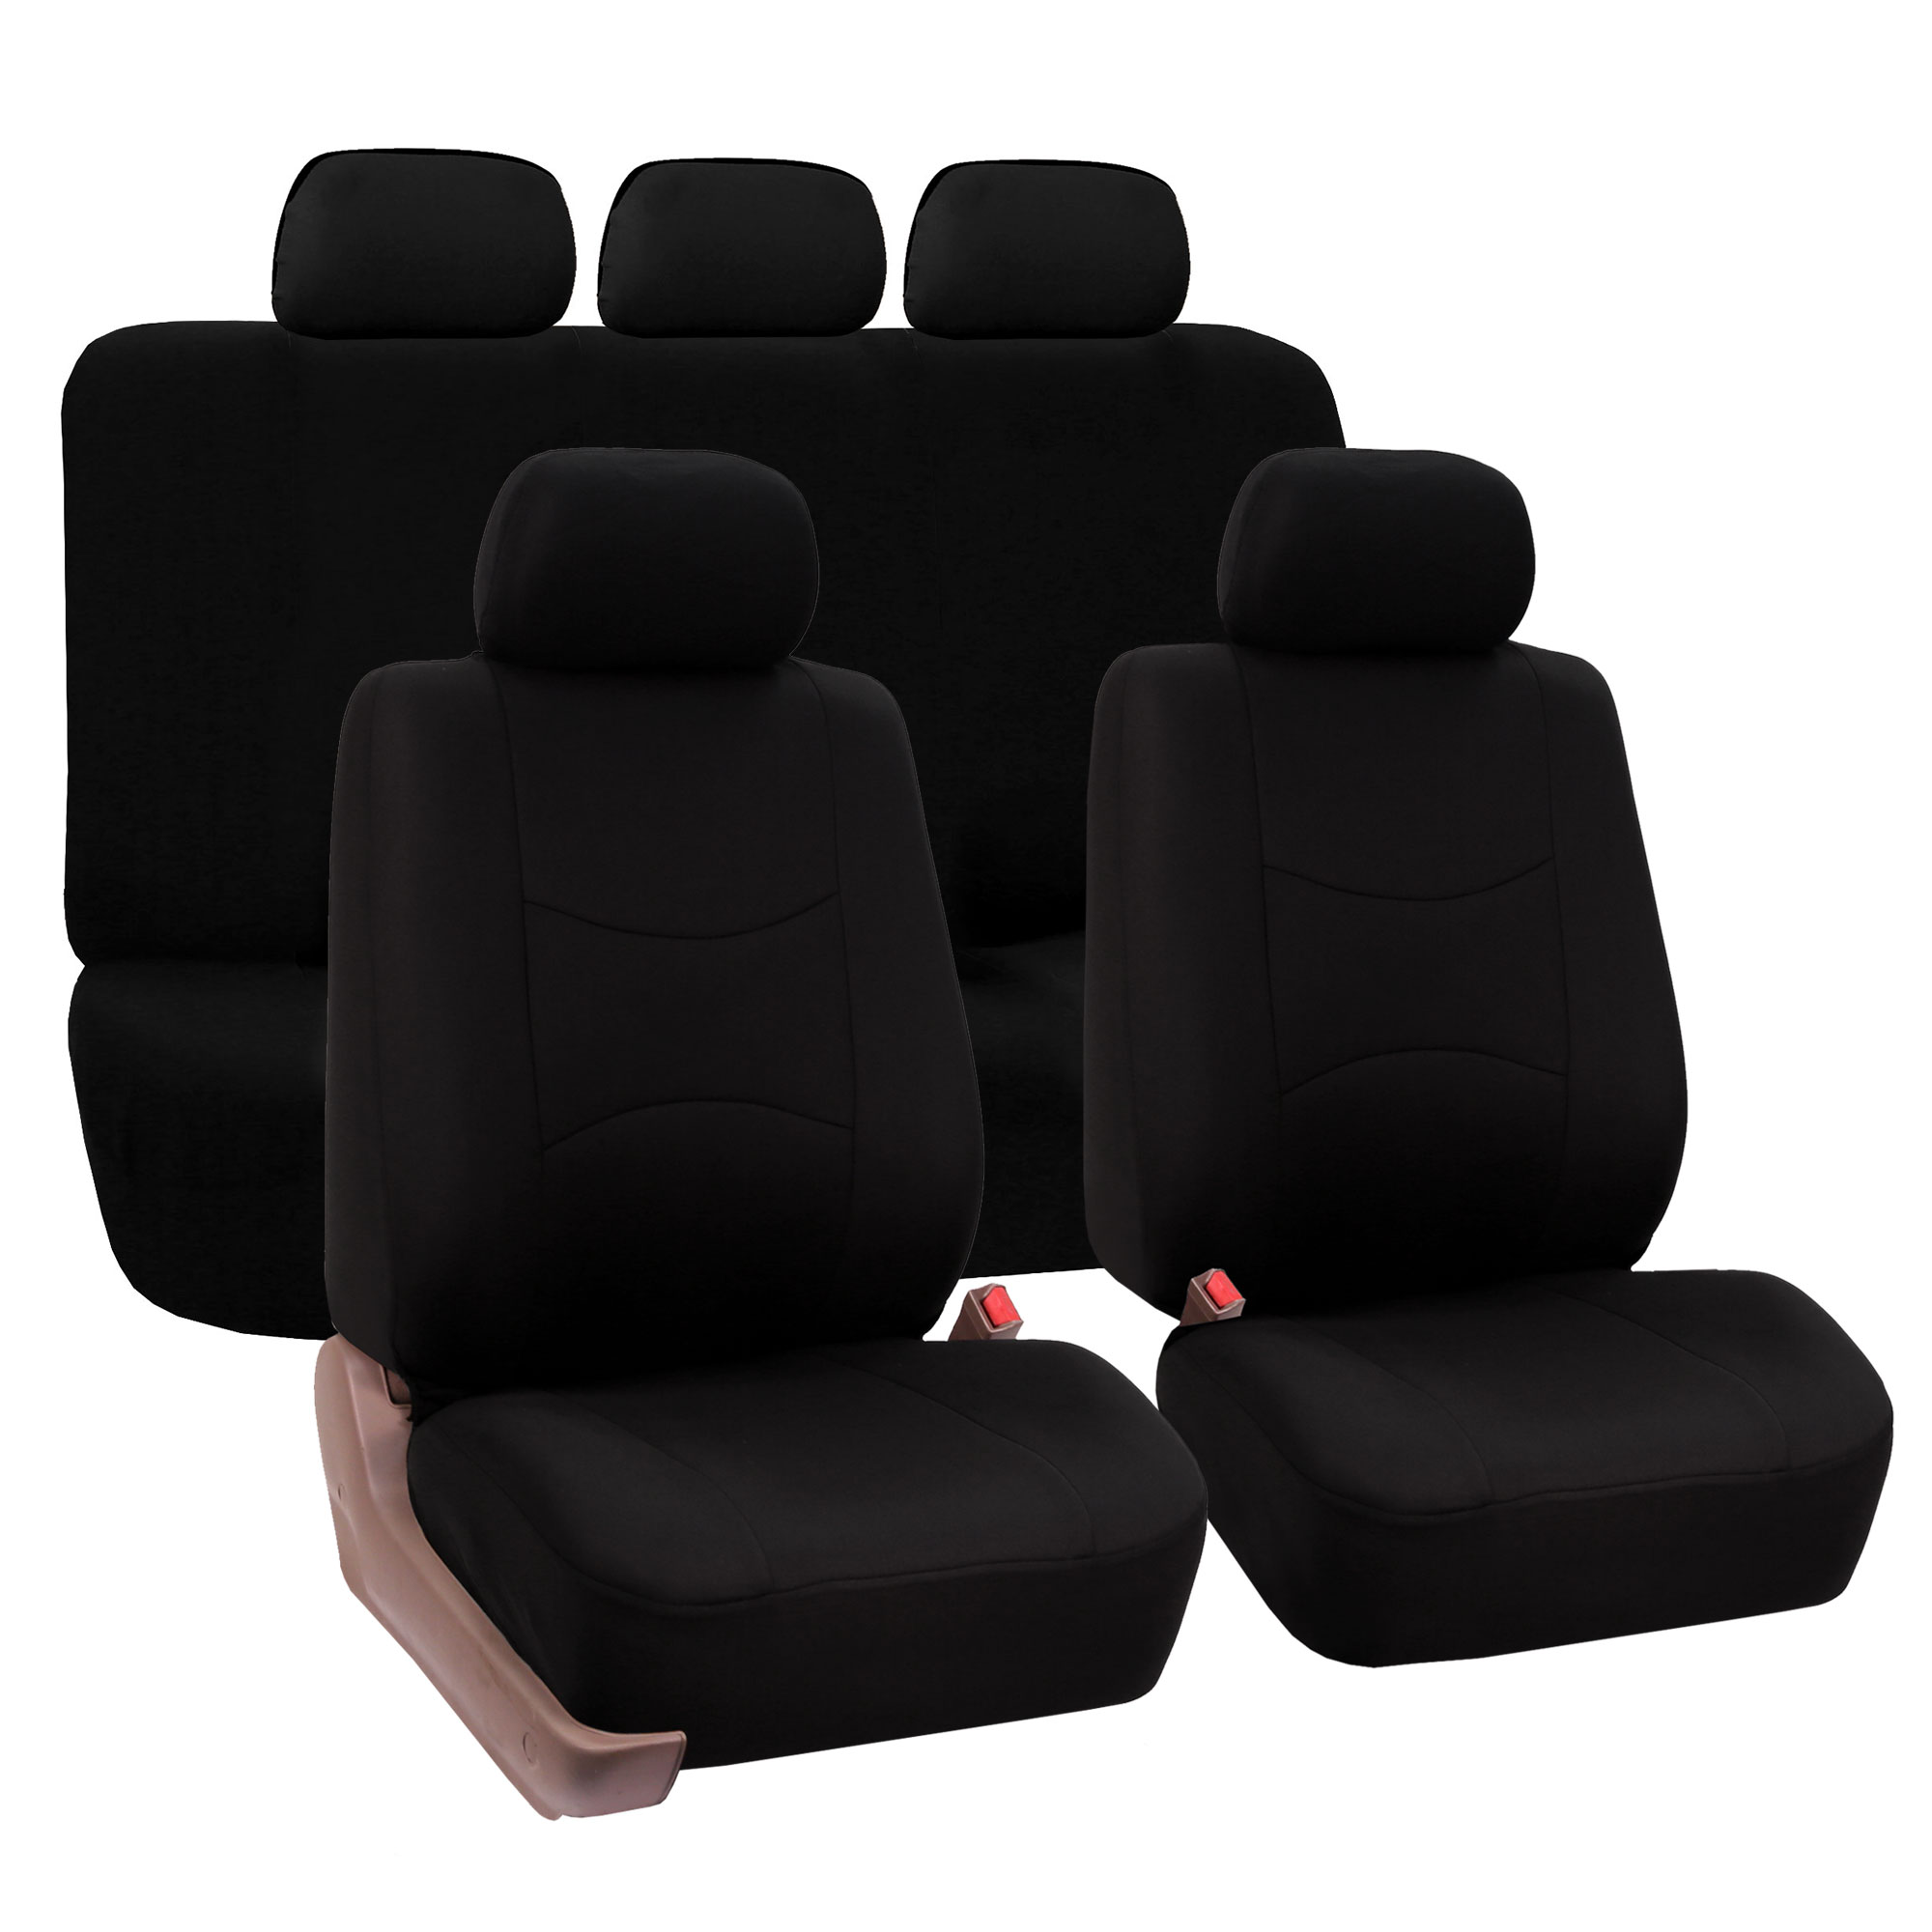 FH Group Universal Flat Cloth Fabric Car Seat Cover, 5 Headrests Full Set, Black - image 1 of 2